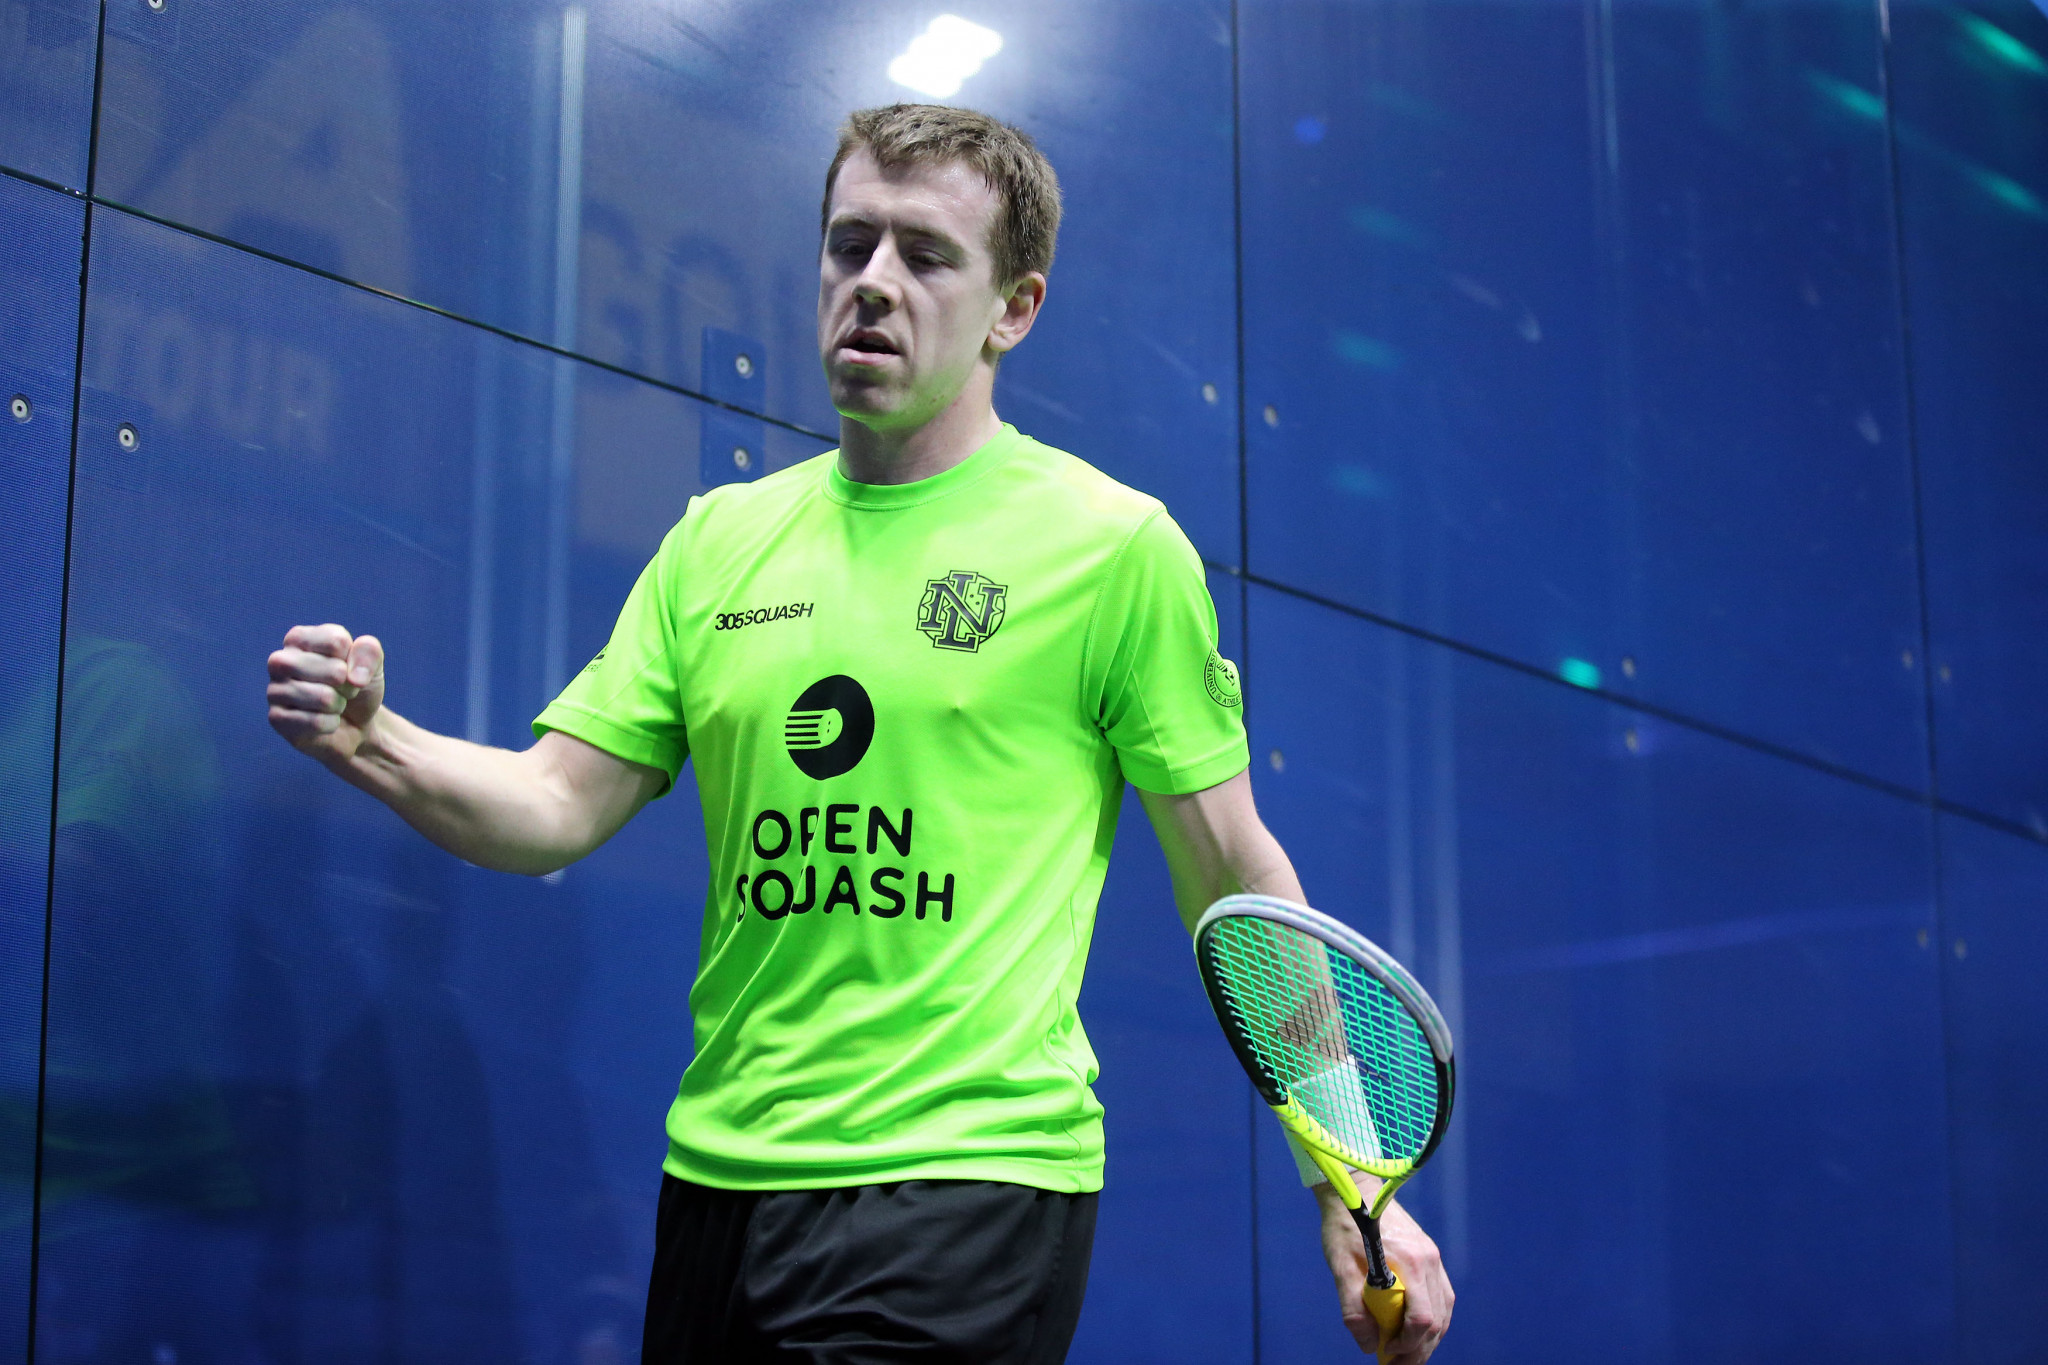 England's world number 36 Nathan Lake knocked out the much higher-ranked Gregoire Marche of France in the opening round of the GillenMarkets Canary Wharf Classic in London ©PSA